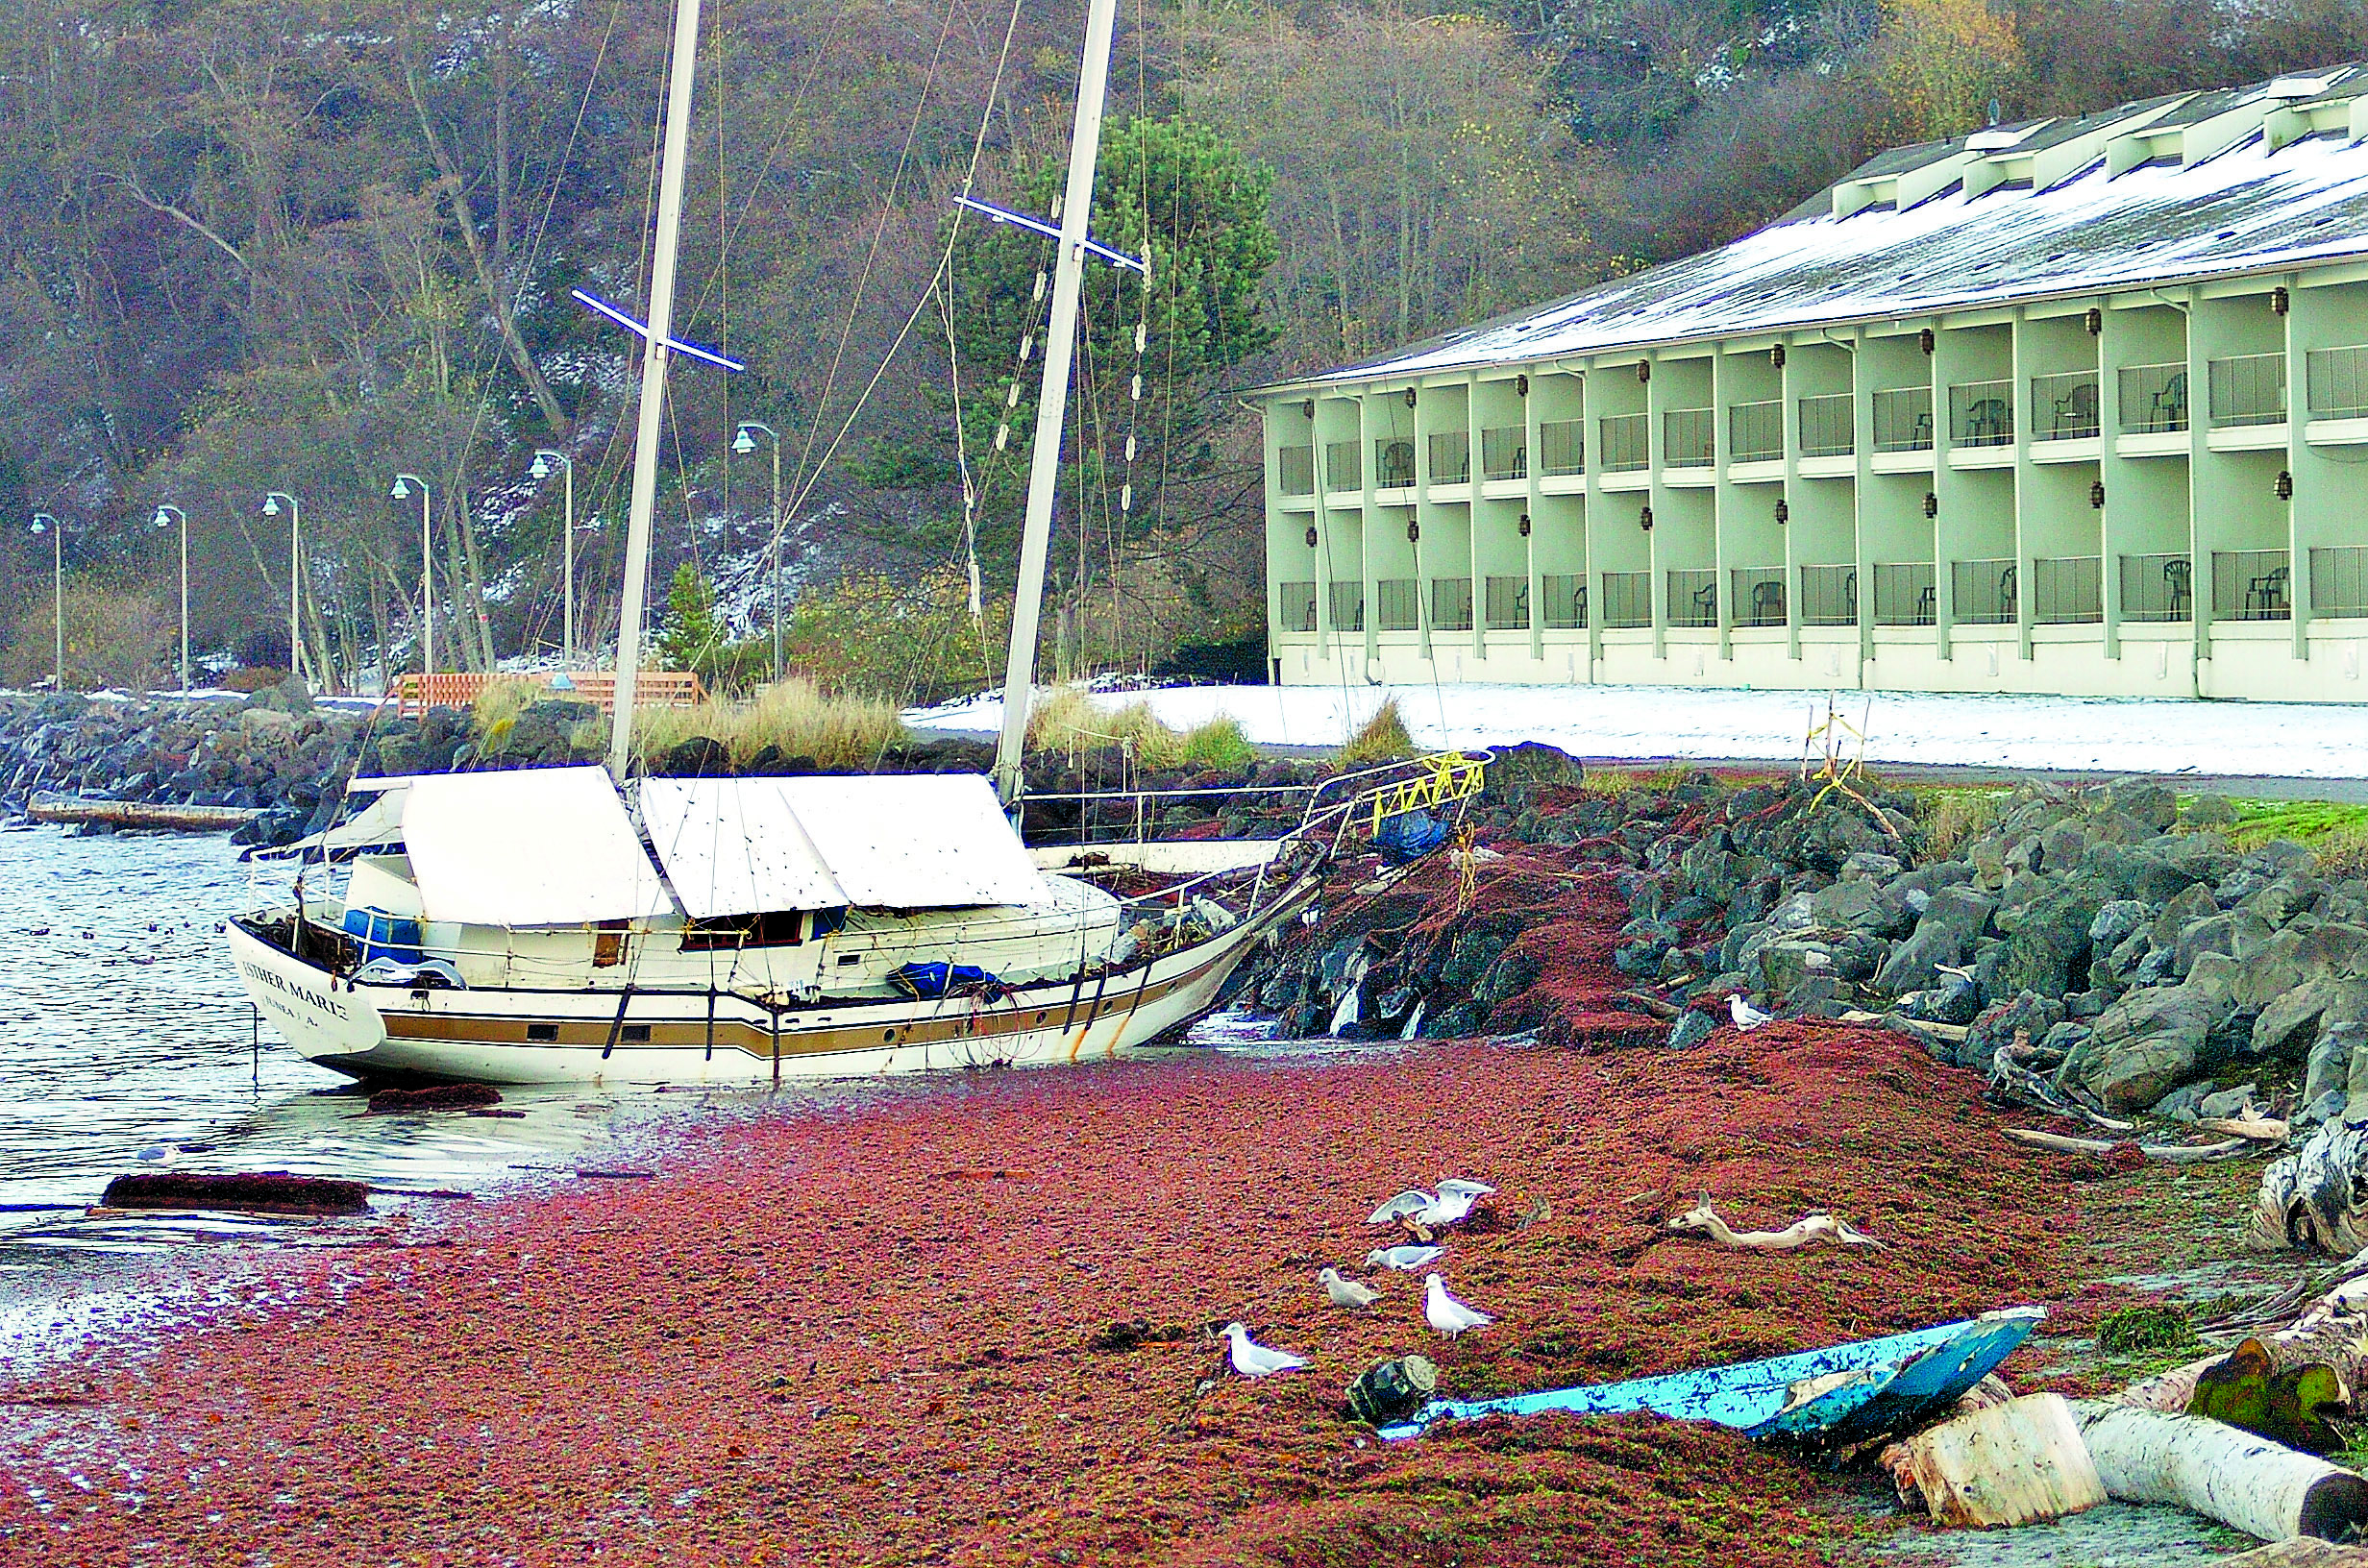 The Esther Marie is shown where she washed aground in 2008 in front of the Red Lion Hotel on Port Angeles Harbor. The boat was cut up and disposed of last month.  -- Peninsula Daily News photo